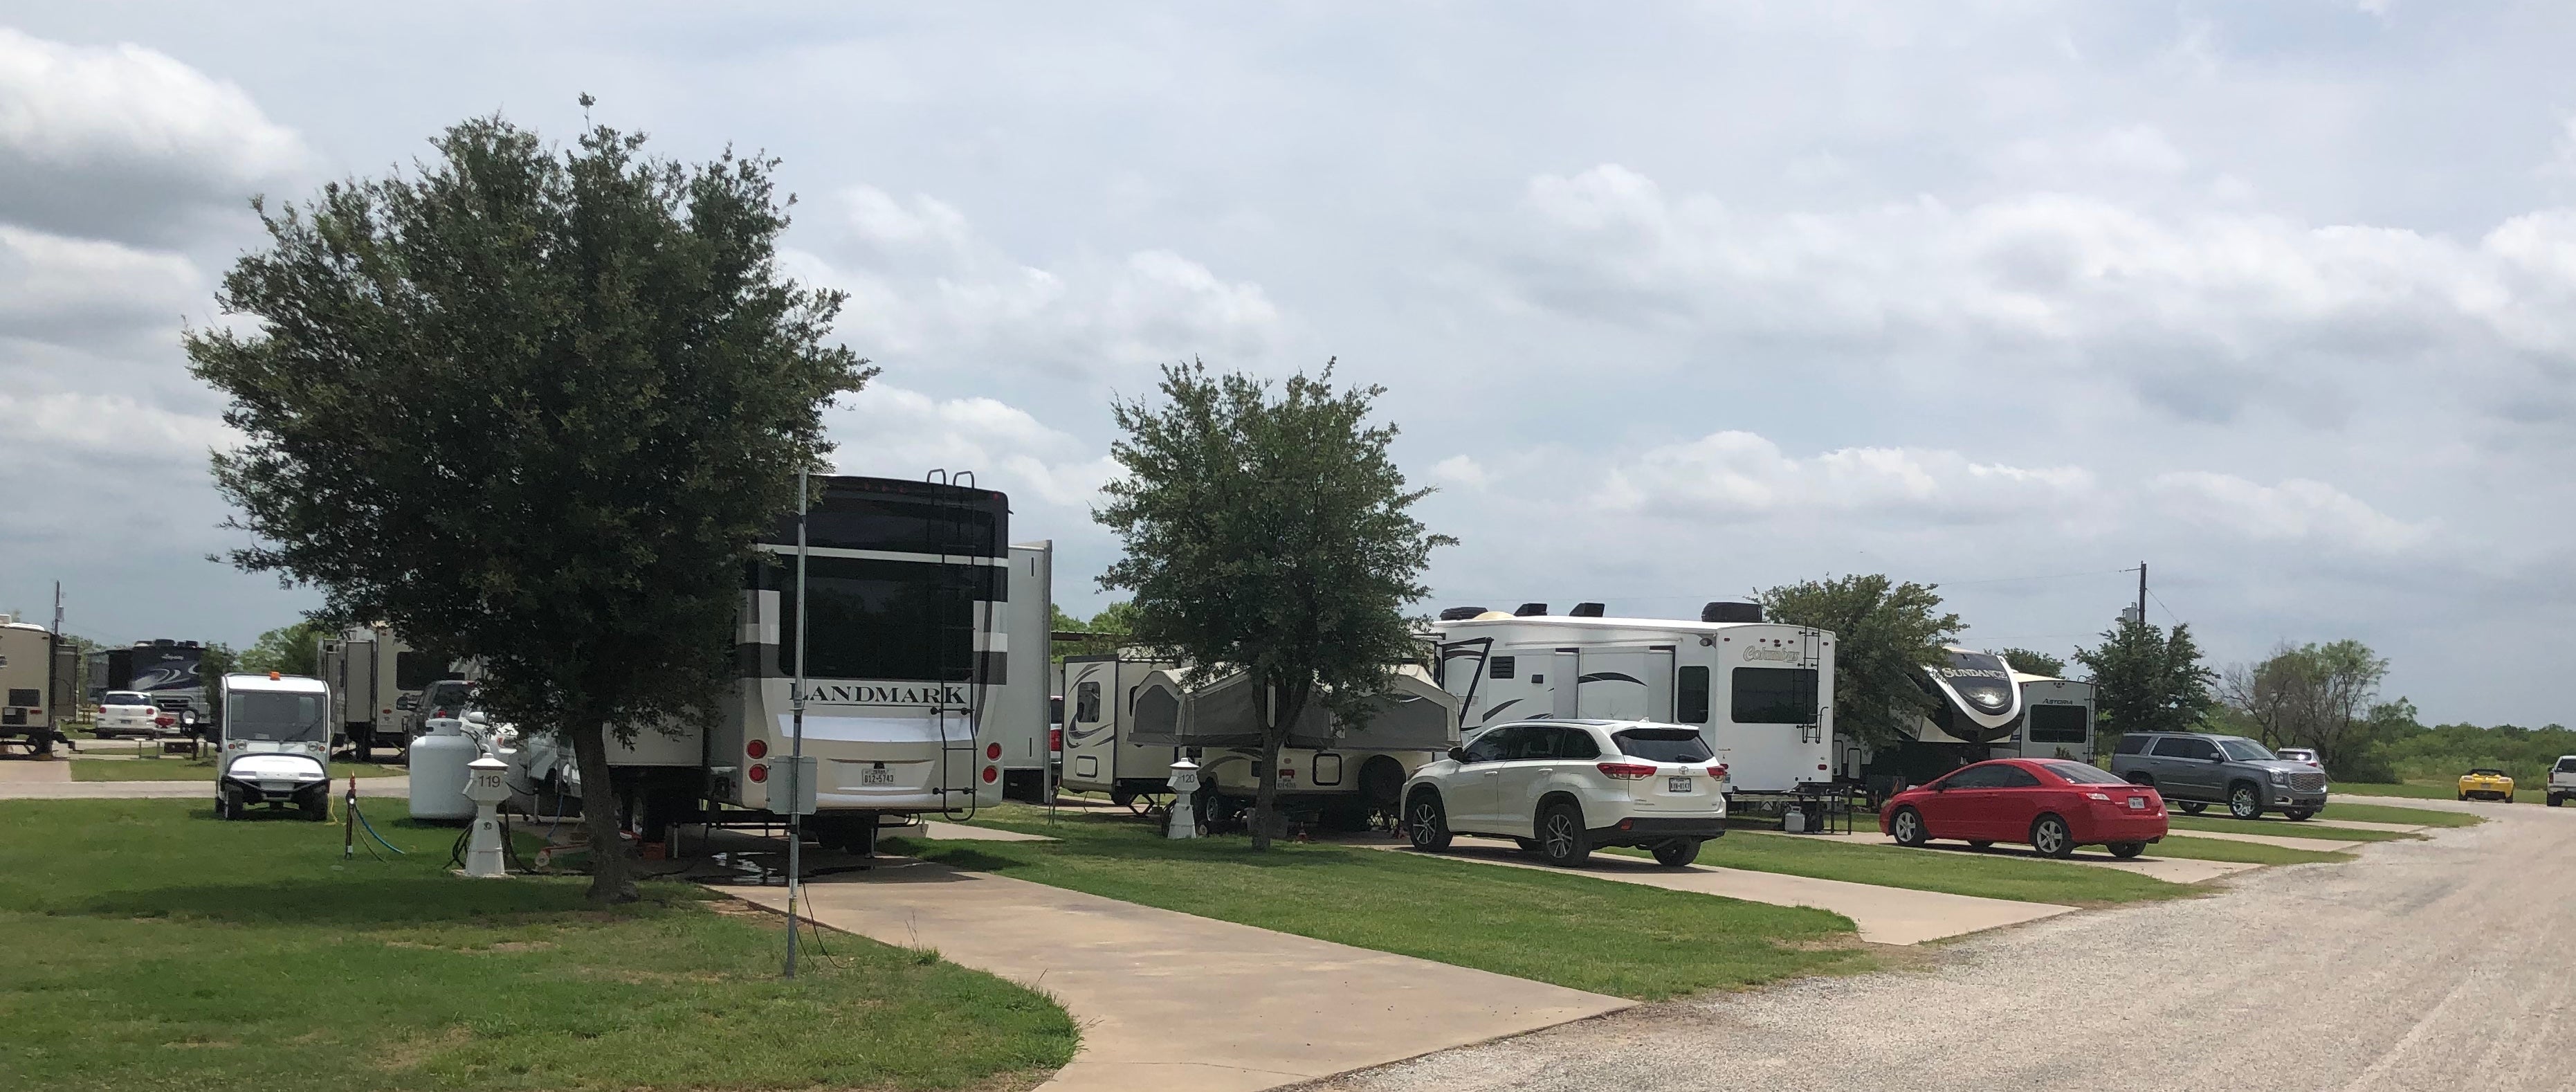 Winner of Texas Campground Owner’s Assn “Park of the year-2019”